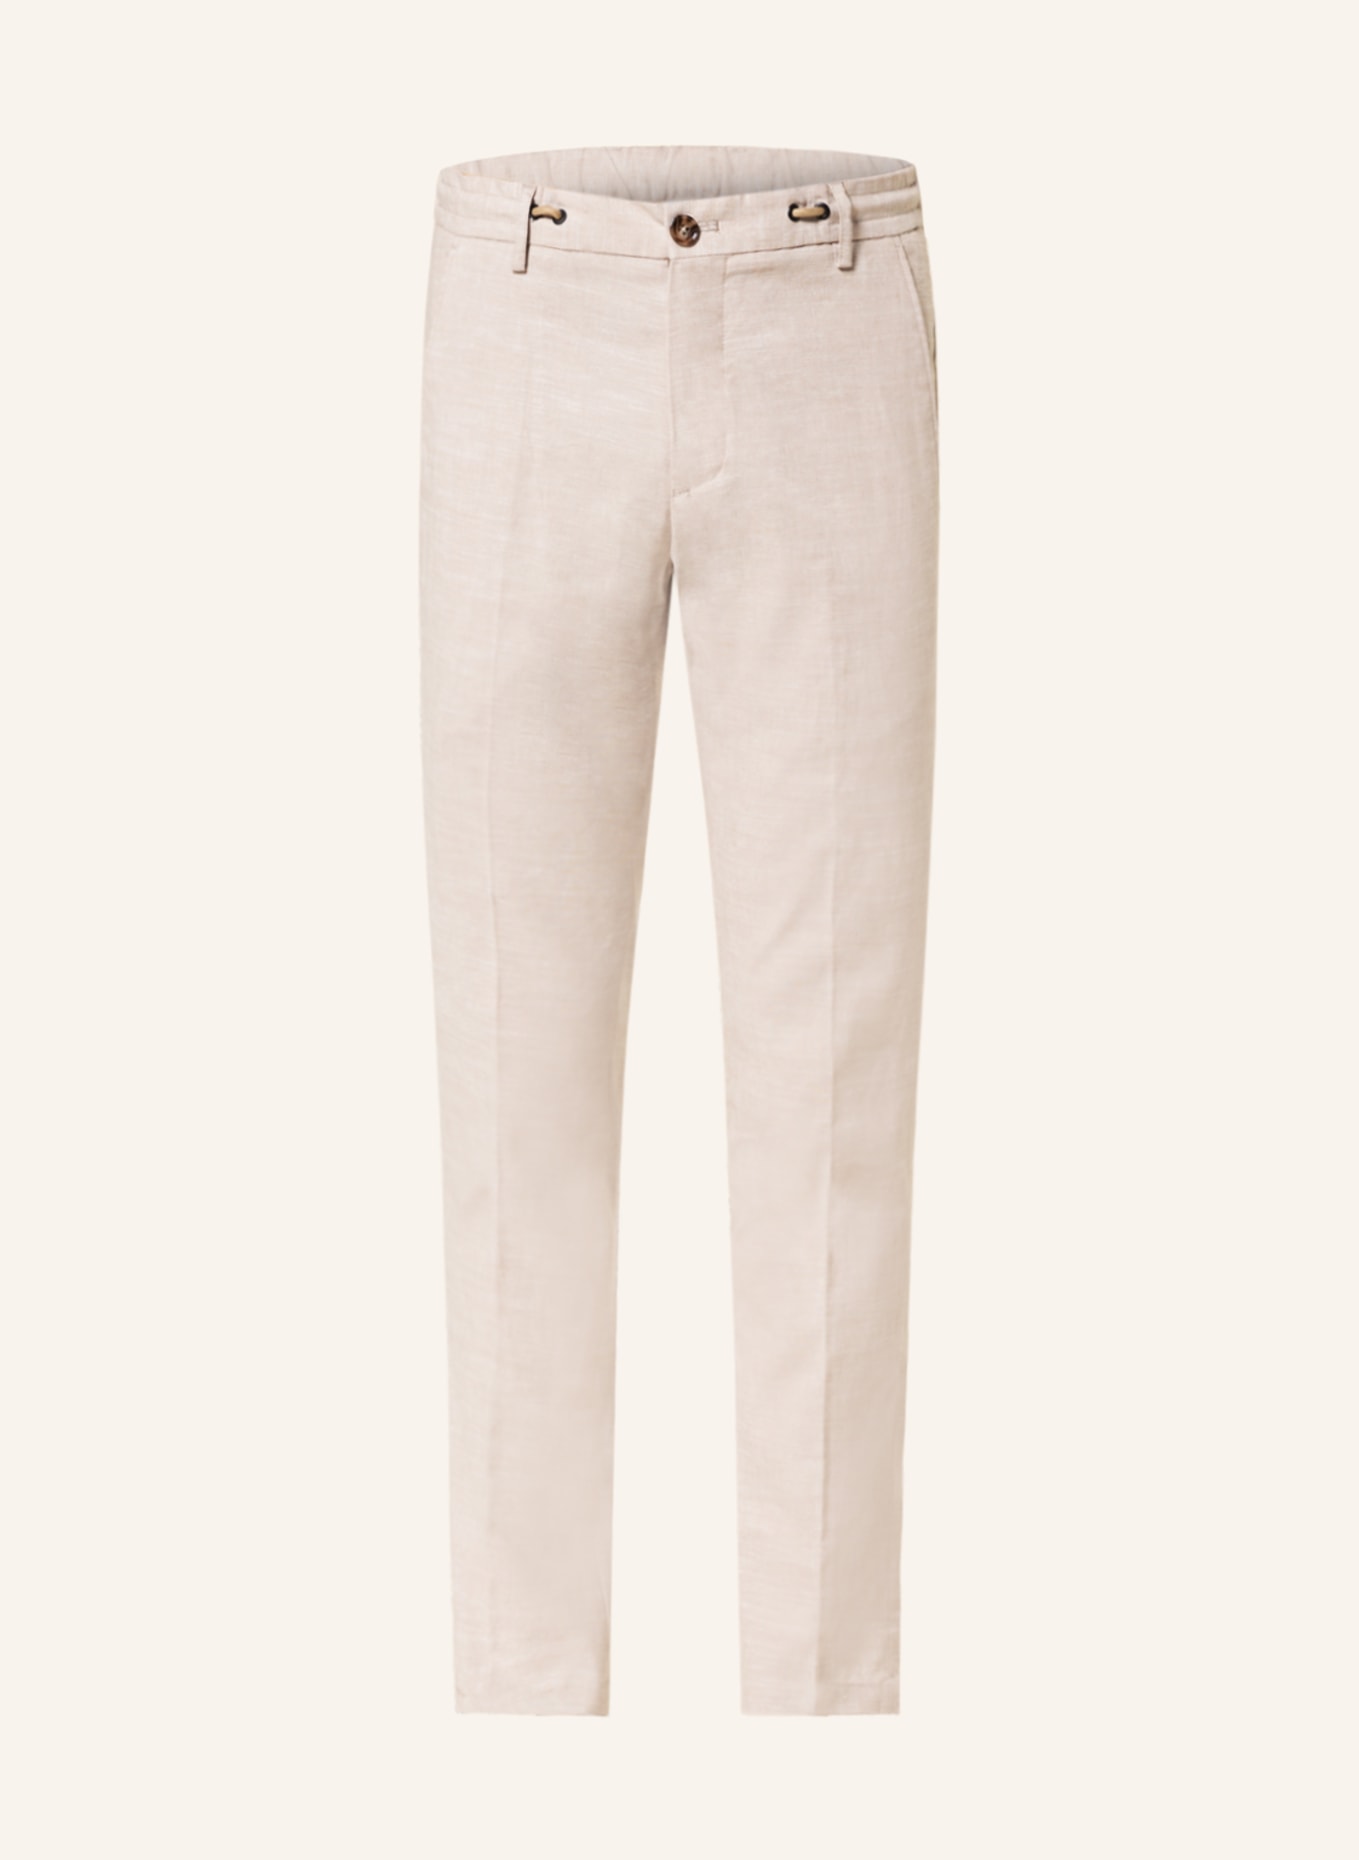 PAUL Suit trousers extra slim fit with linen, Color: 003 Light Beige(Image null)